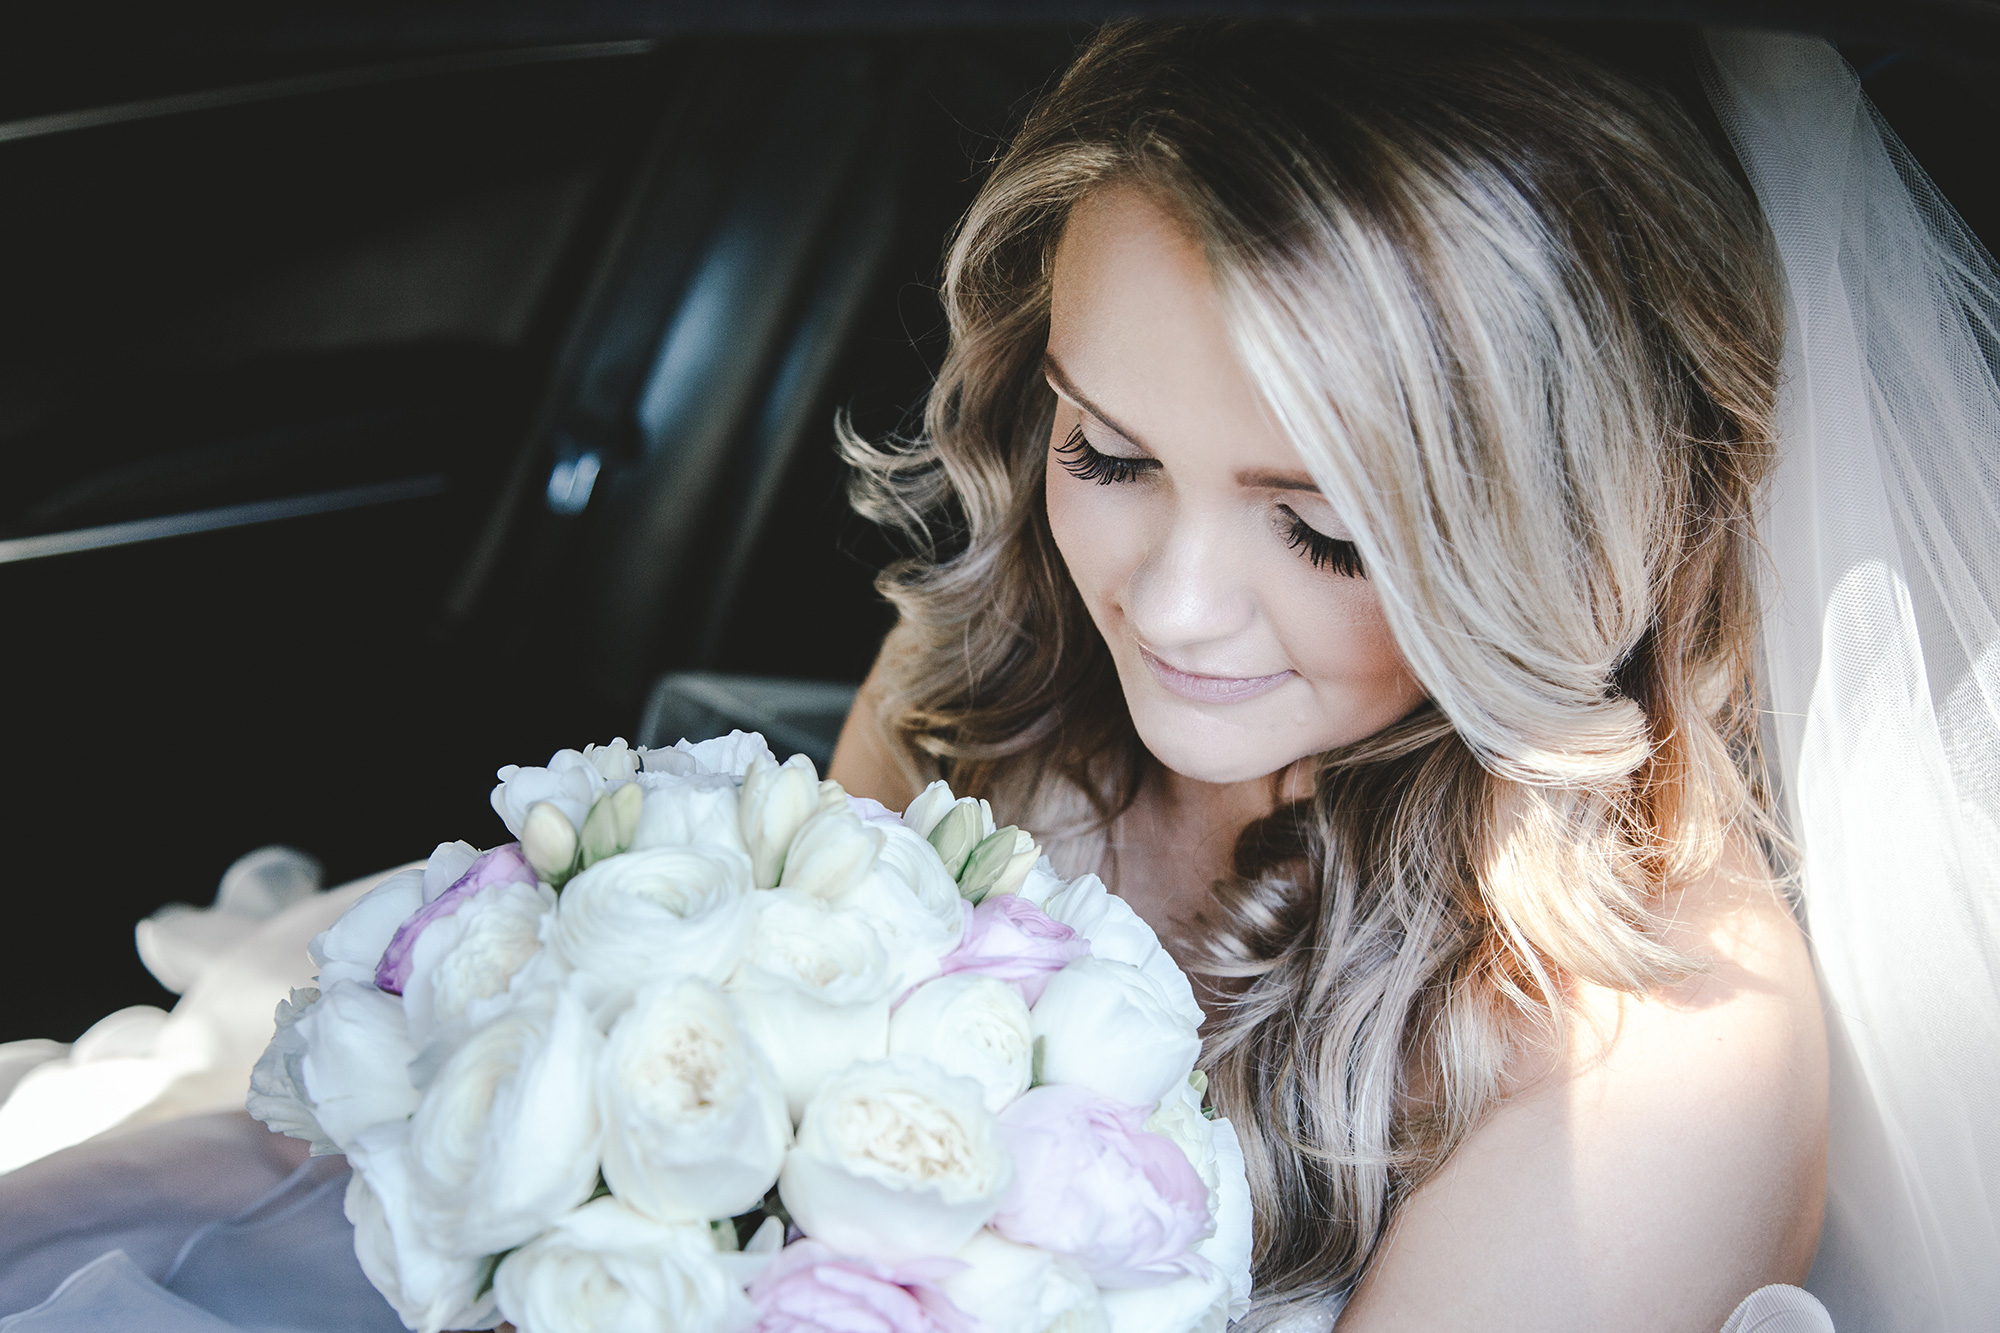 Camille_James_Rustic-Glam-Wedding_Pure-Image-Photography_031